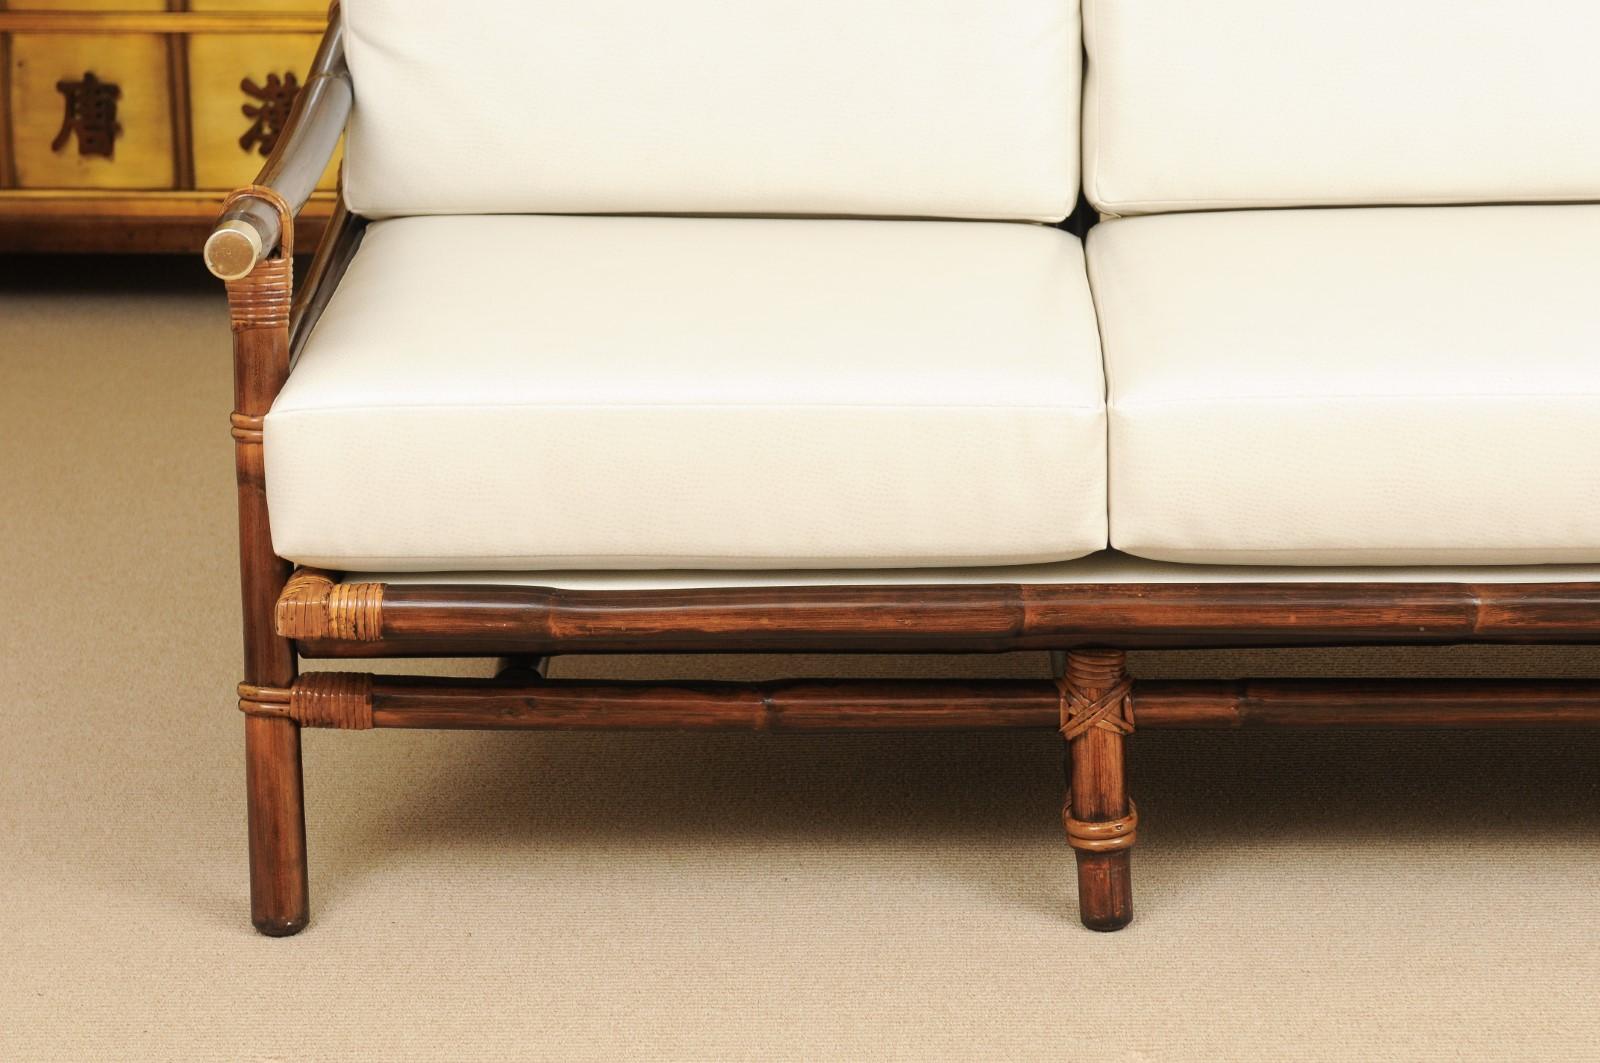 A fabulous restored vintage Campaign style sofa from a difficult to find series by John Wisner for Ficks Reed. Exceptional rattan and hardwood construction with Cane back panels. Brass caps accent the arms. Aged to absolute perfection. The